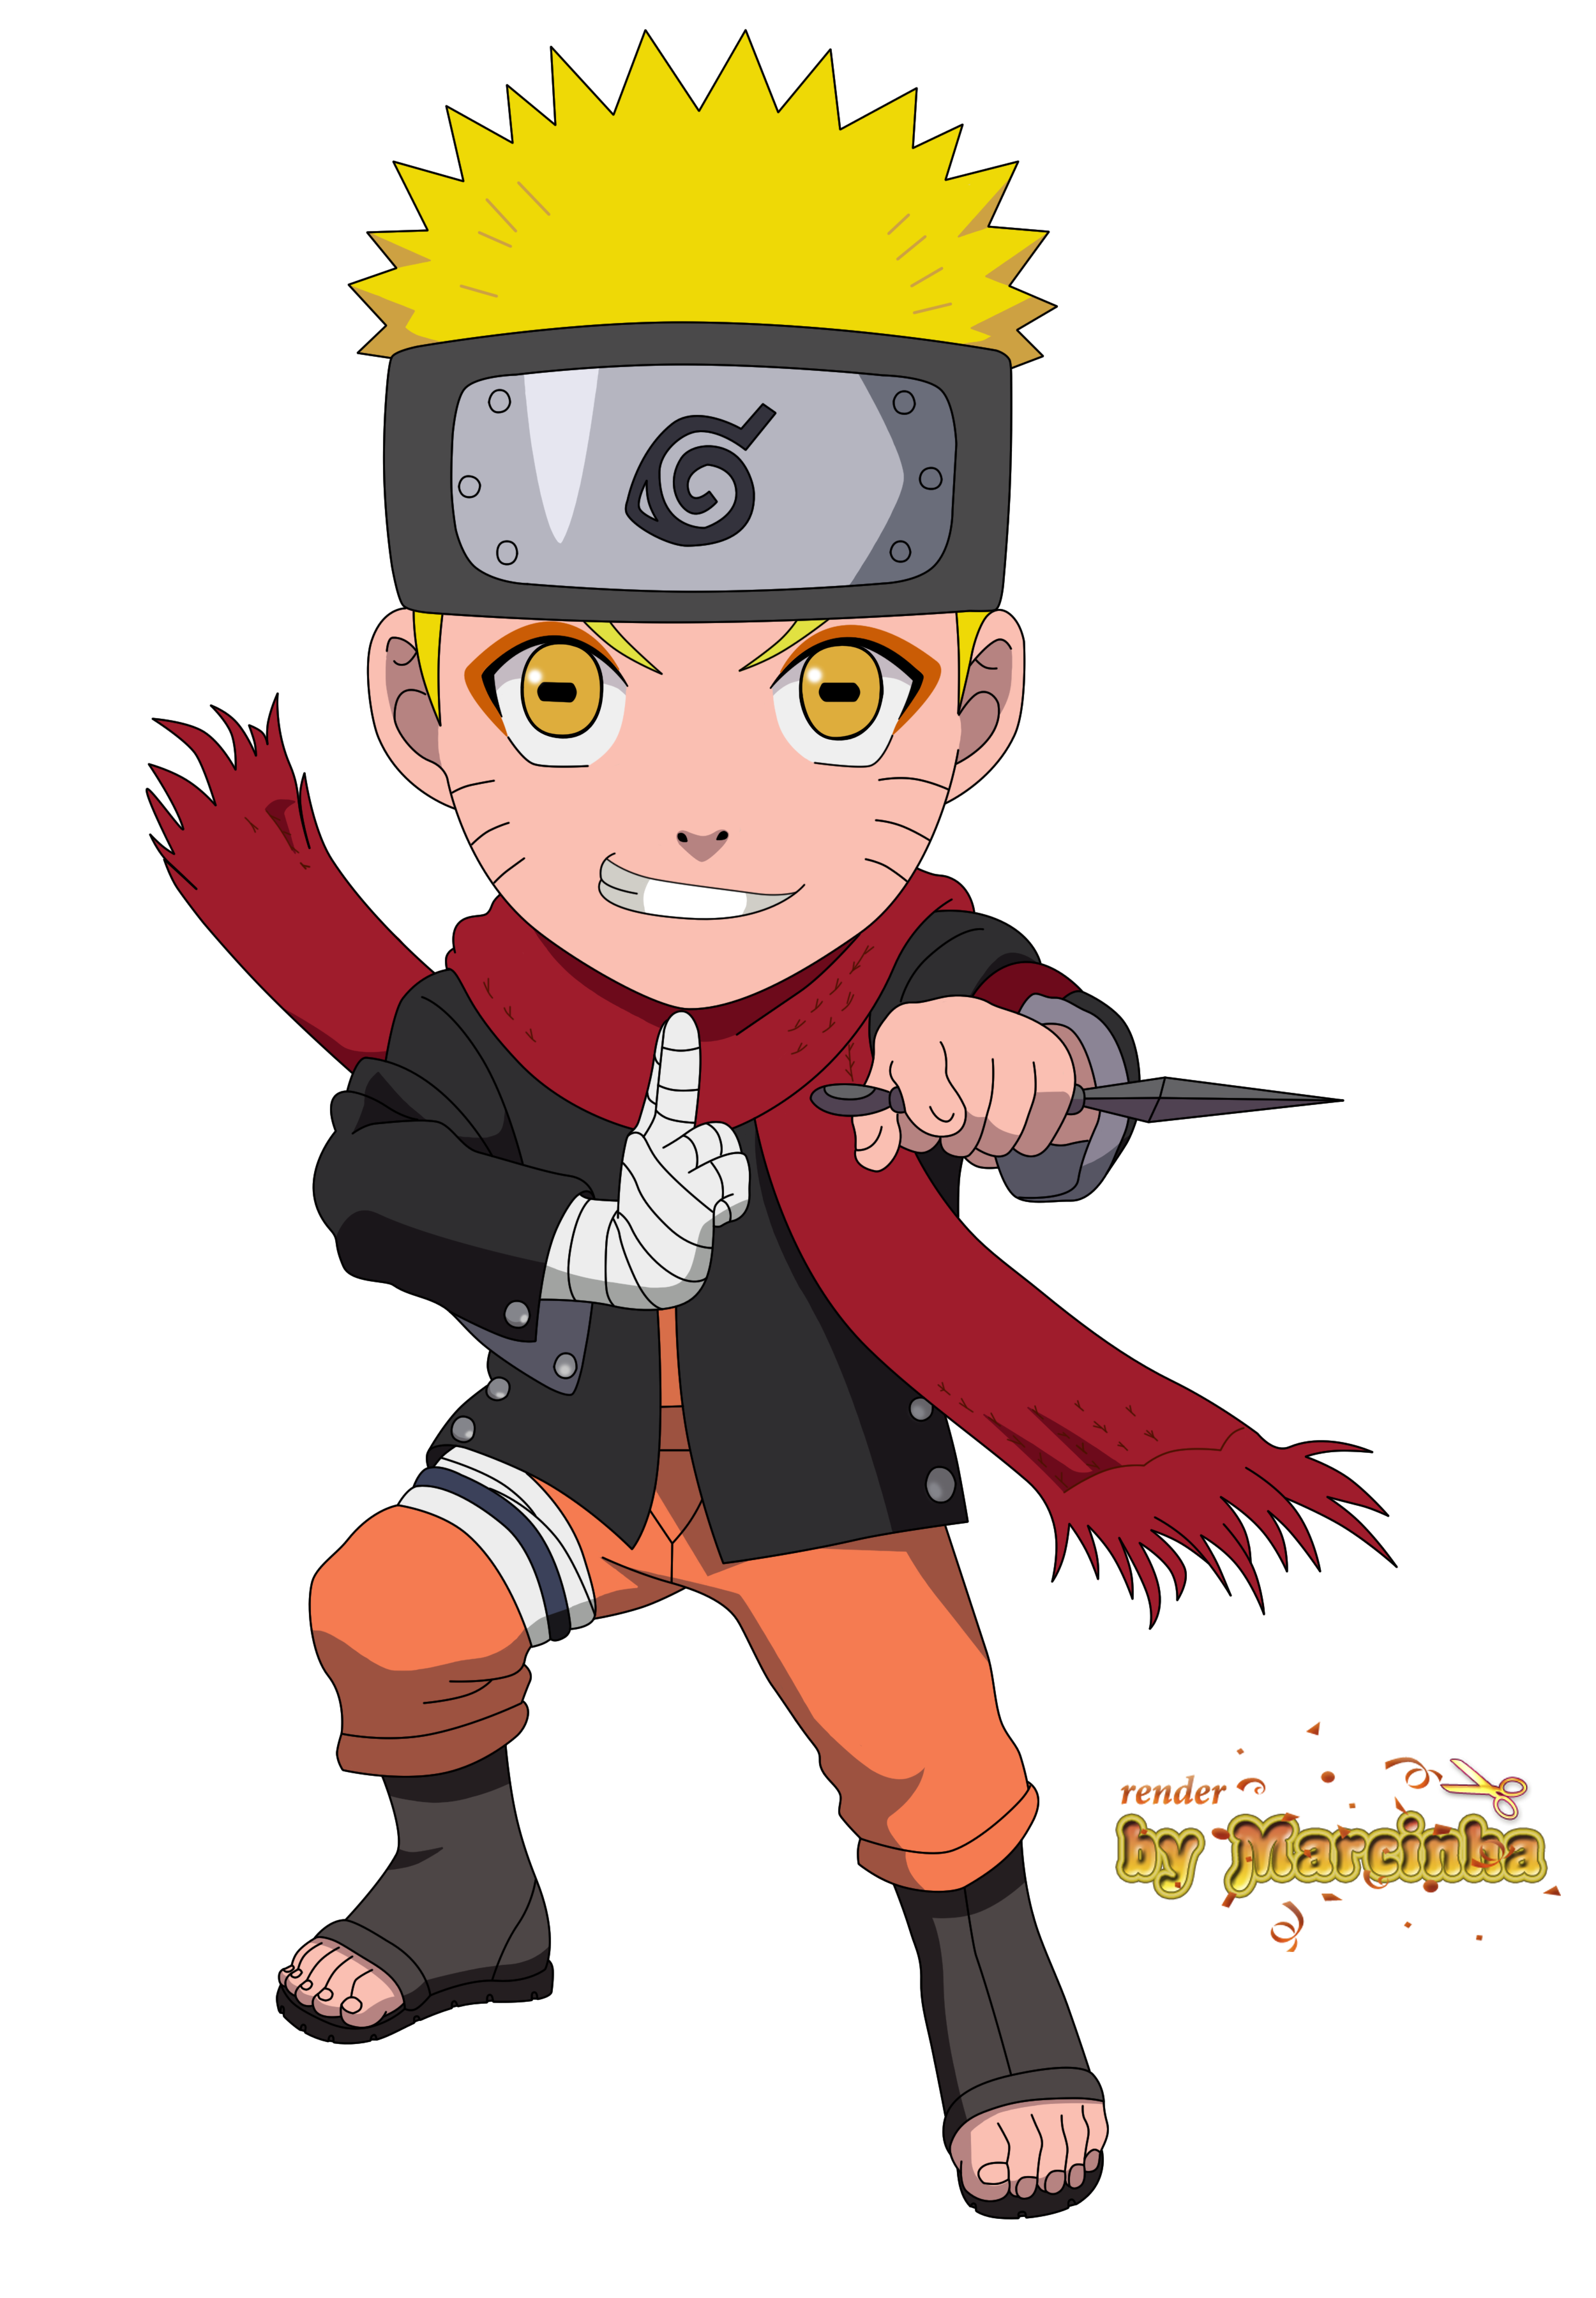 Naruto Photos, Download The BEST Free Naruto Stock Photos & HD Images